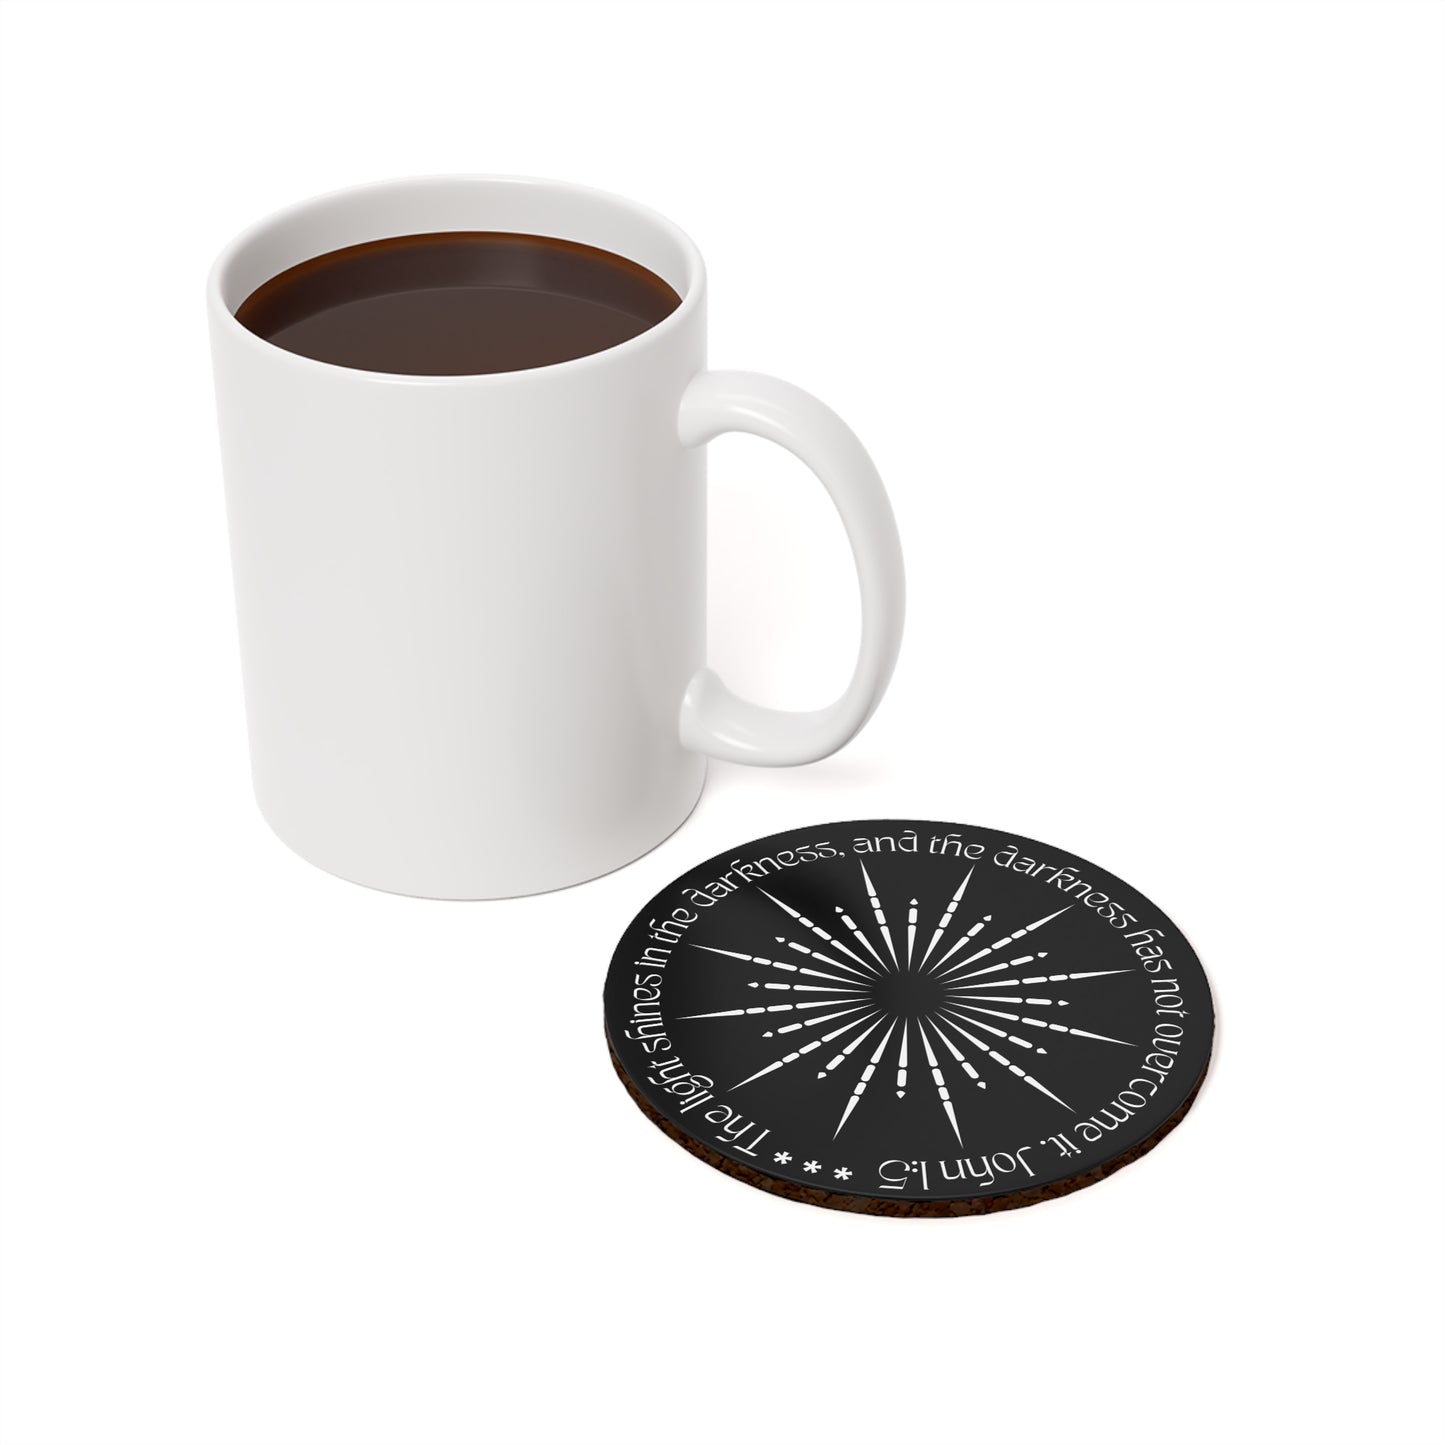 Coaster for Candles, Mugs, Glasses, The Light Sines In the Darkness